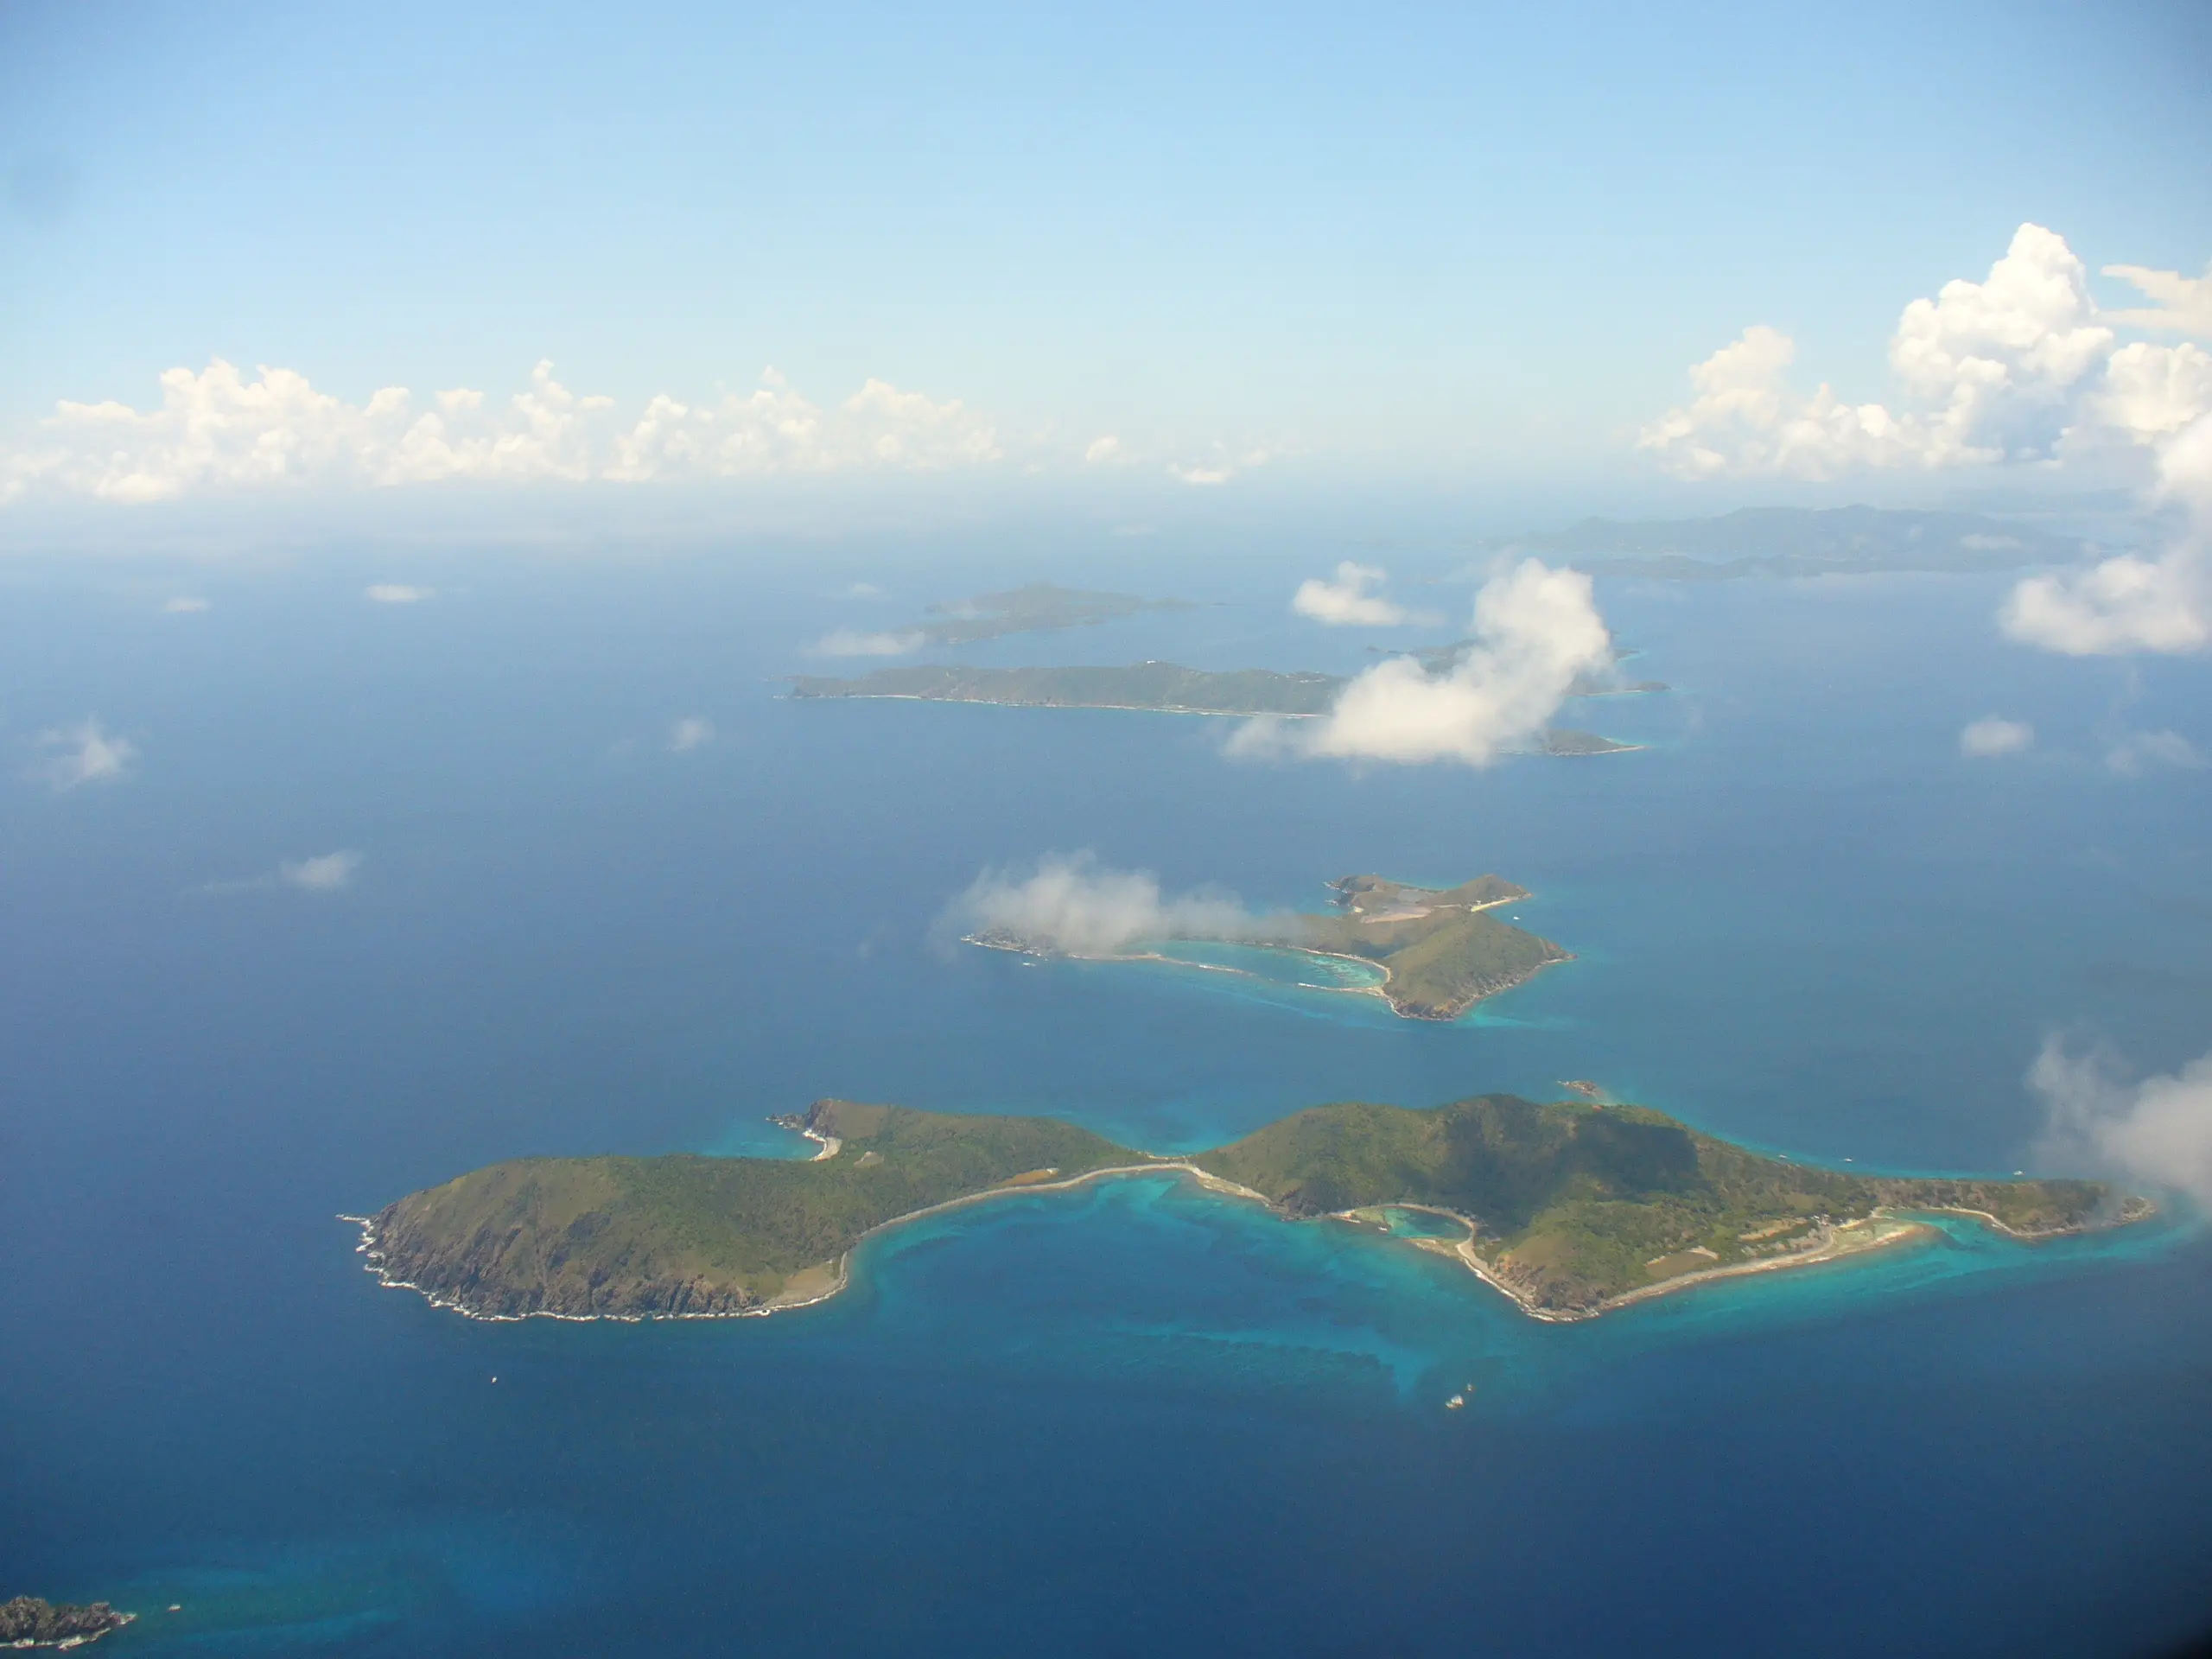 How to get to BVI